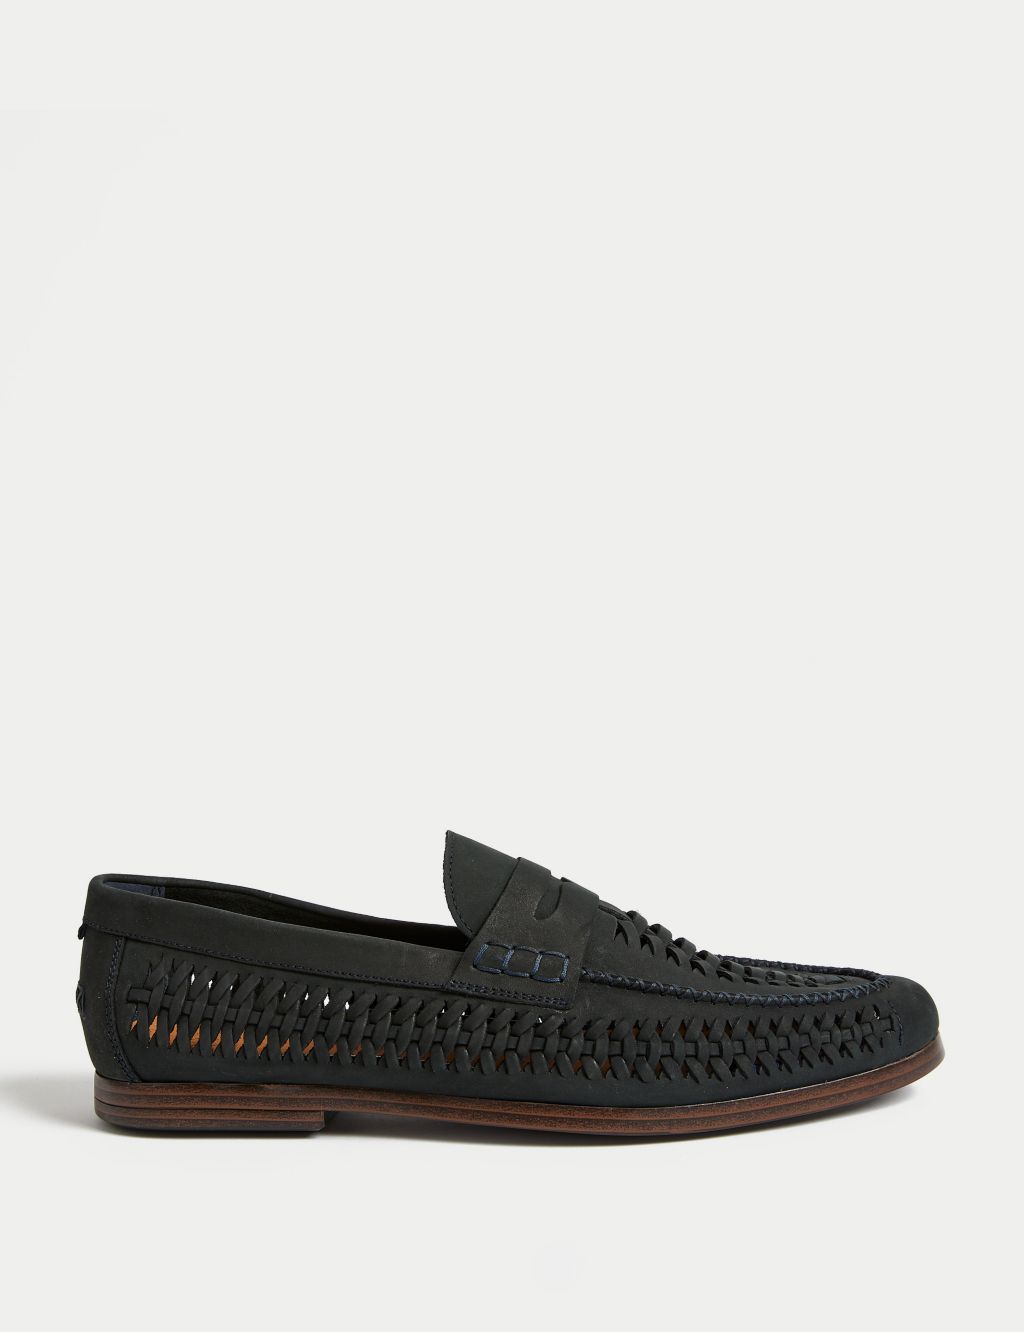 Men’s Loafers | M&S